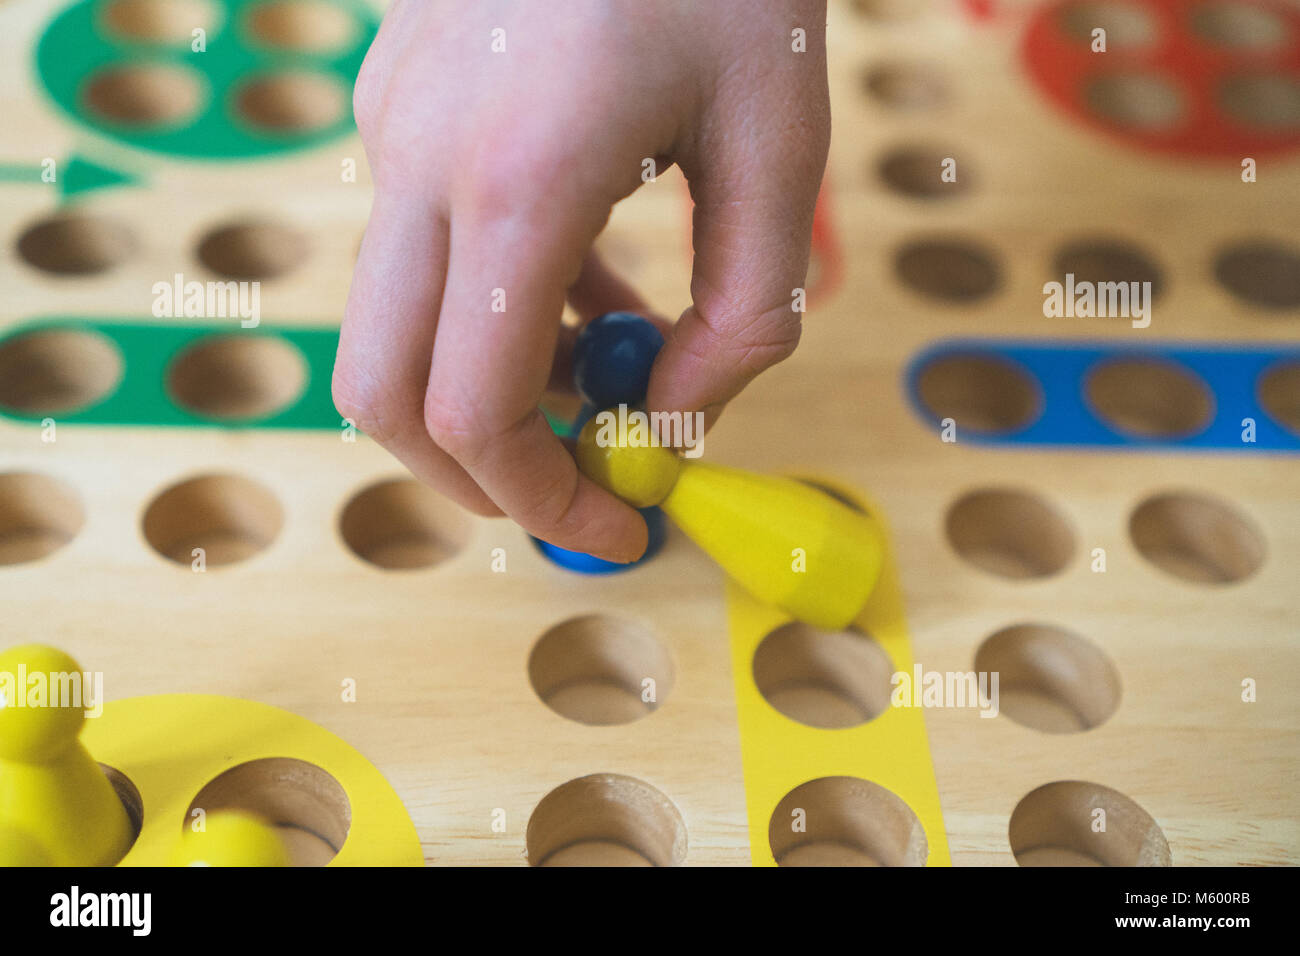 Child playing Ludo board game. Close-up view. Stock Photo